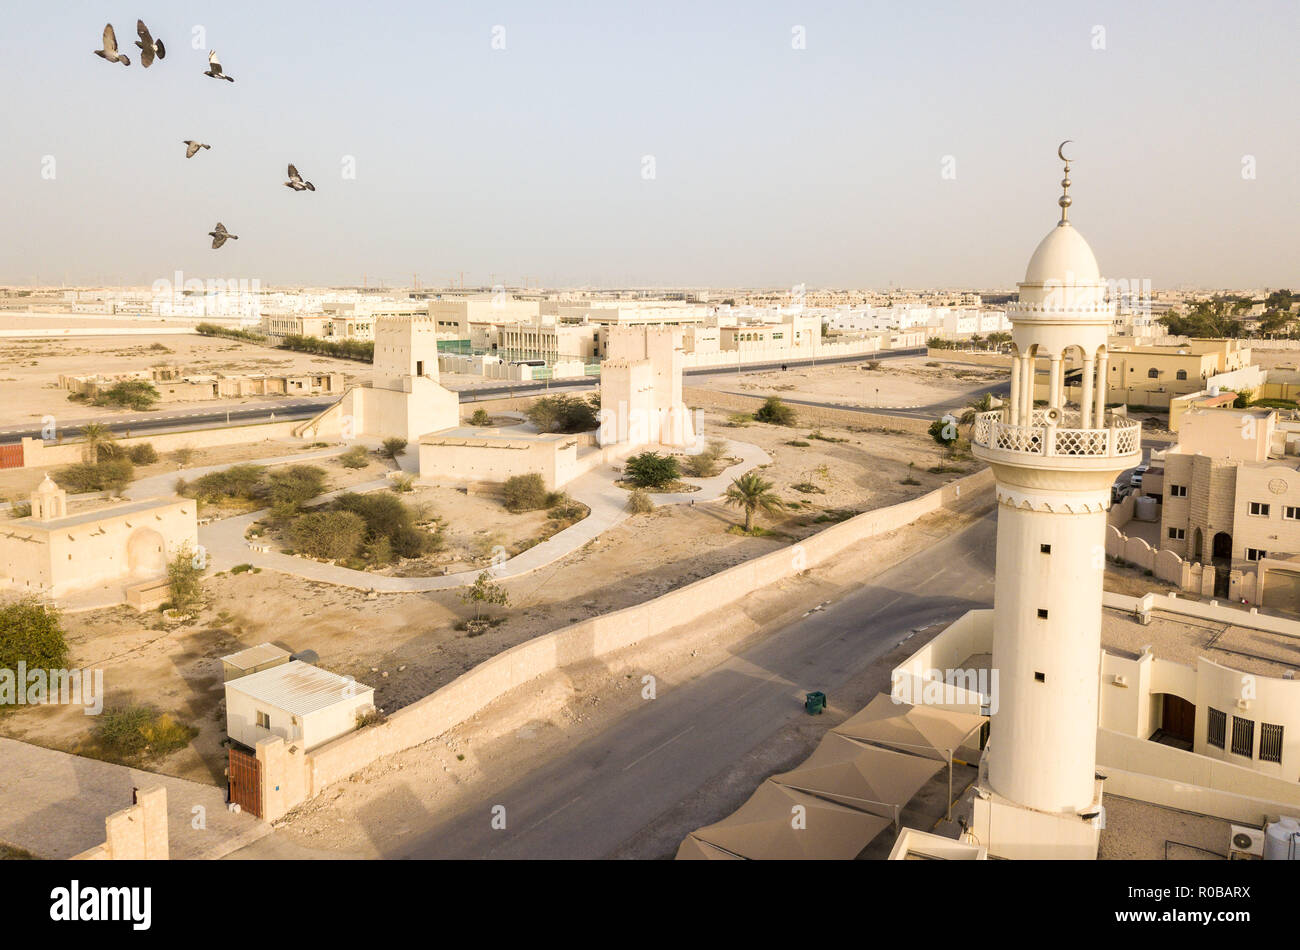 Barzan watchtowers and a mosque. Ancient Arabian fortification. Fort Towers. Aerial drone foto with birds of traditional and modern arab town, Qatar Stock Photo